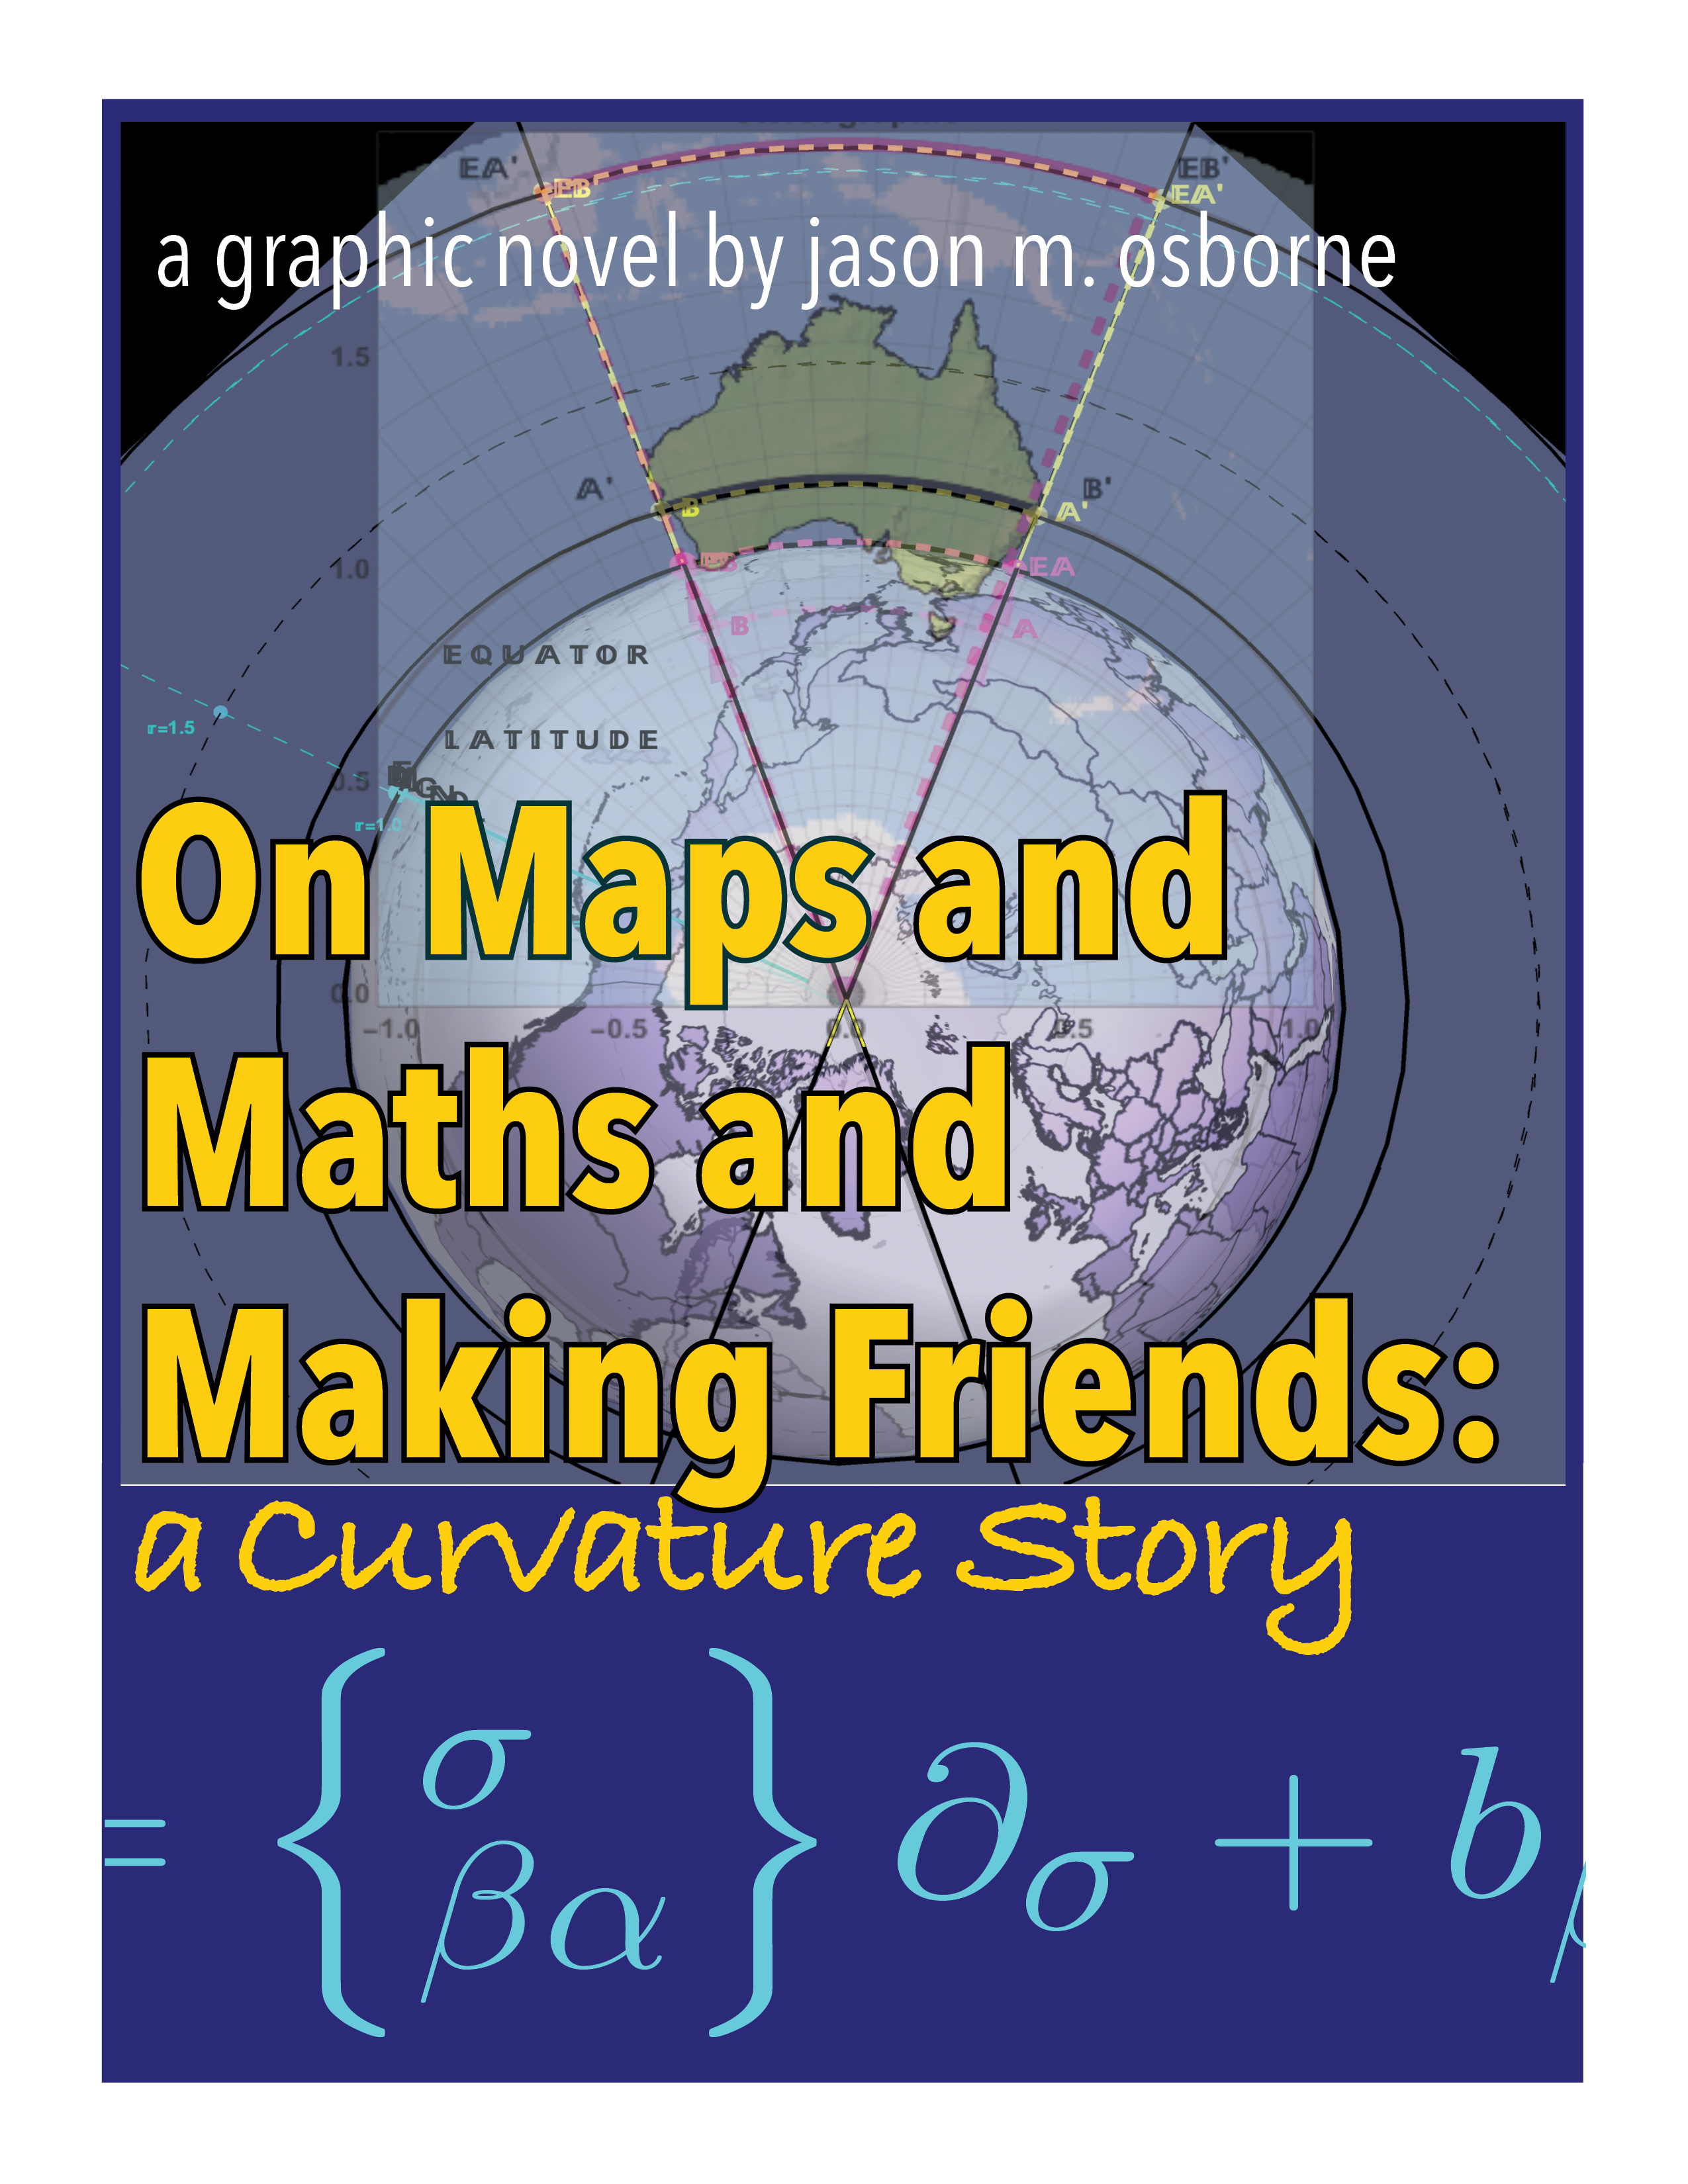 A Curvature Story Excerpts. (top/left) Title Page (middle 1) Meet Pete-A Character in the Story (middle 2) Math In Animated Graphic Novel Form (bottom/right) Math In Traditional Form: The Professor’s Indecipherable Notes (See More Screenshots Here)